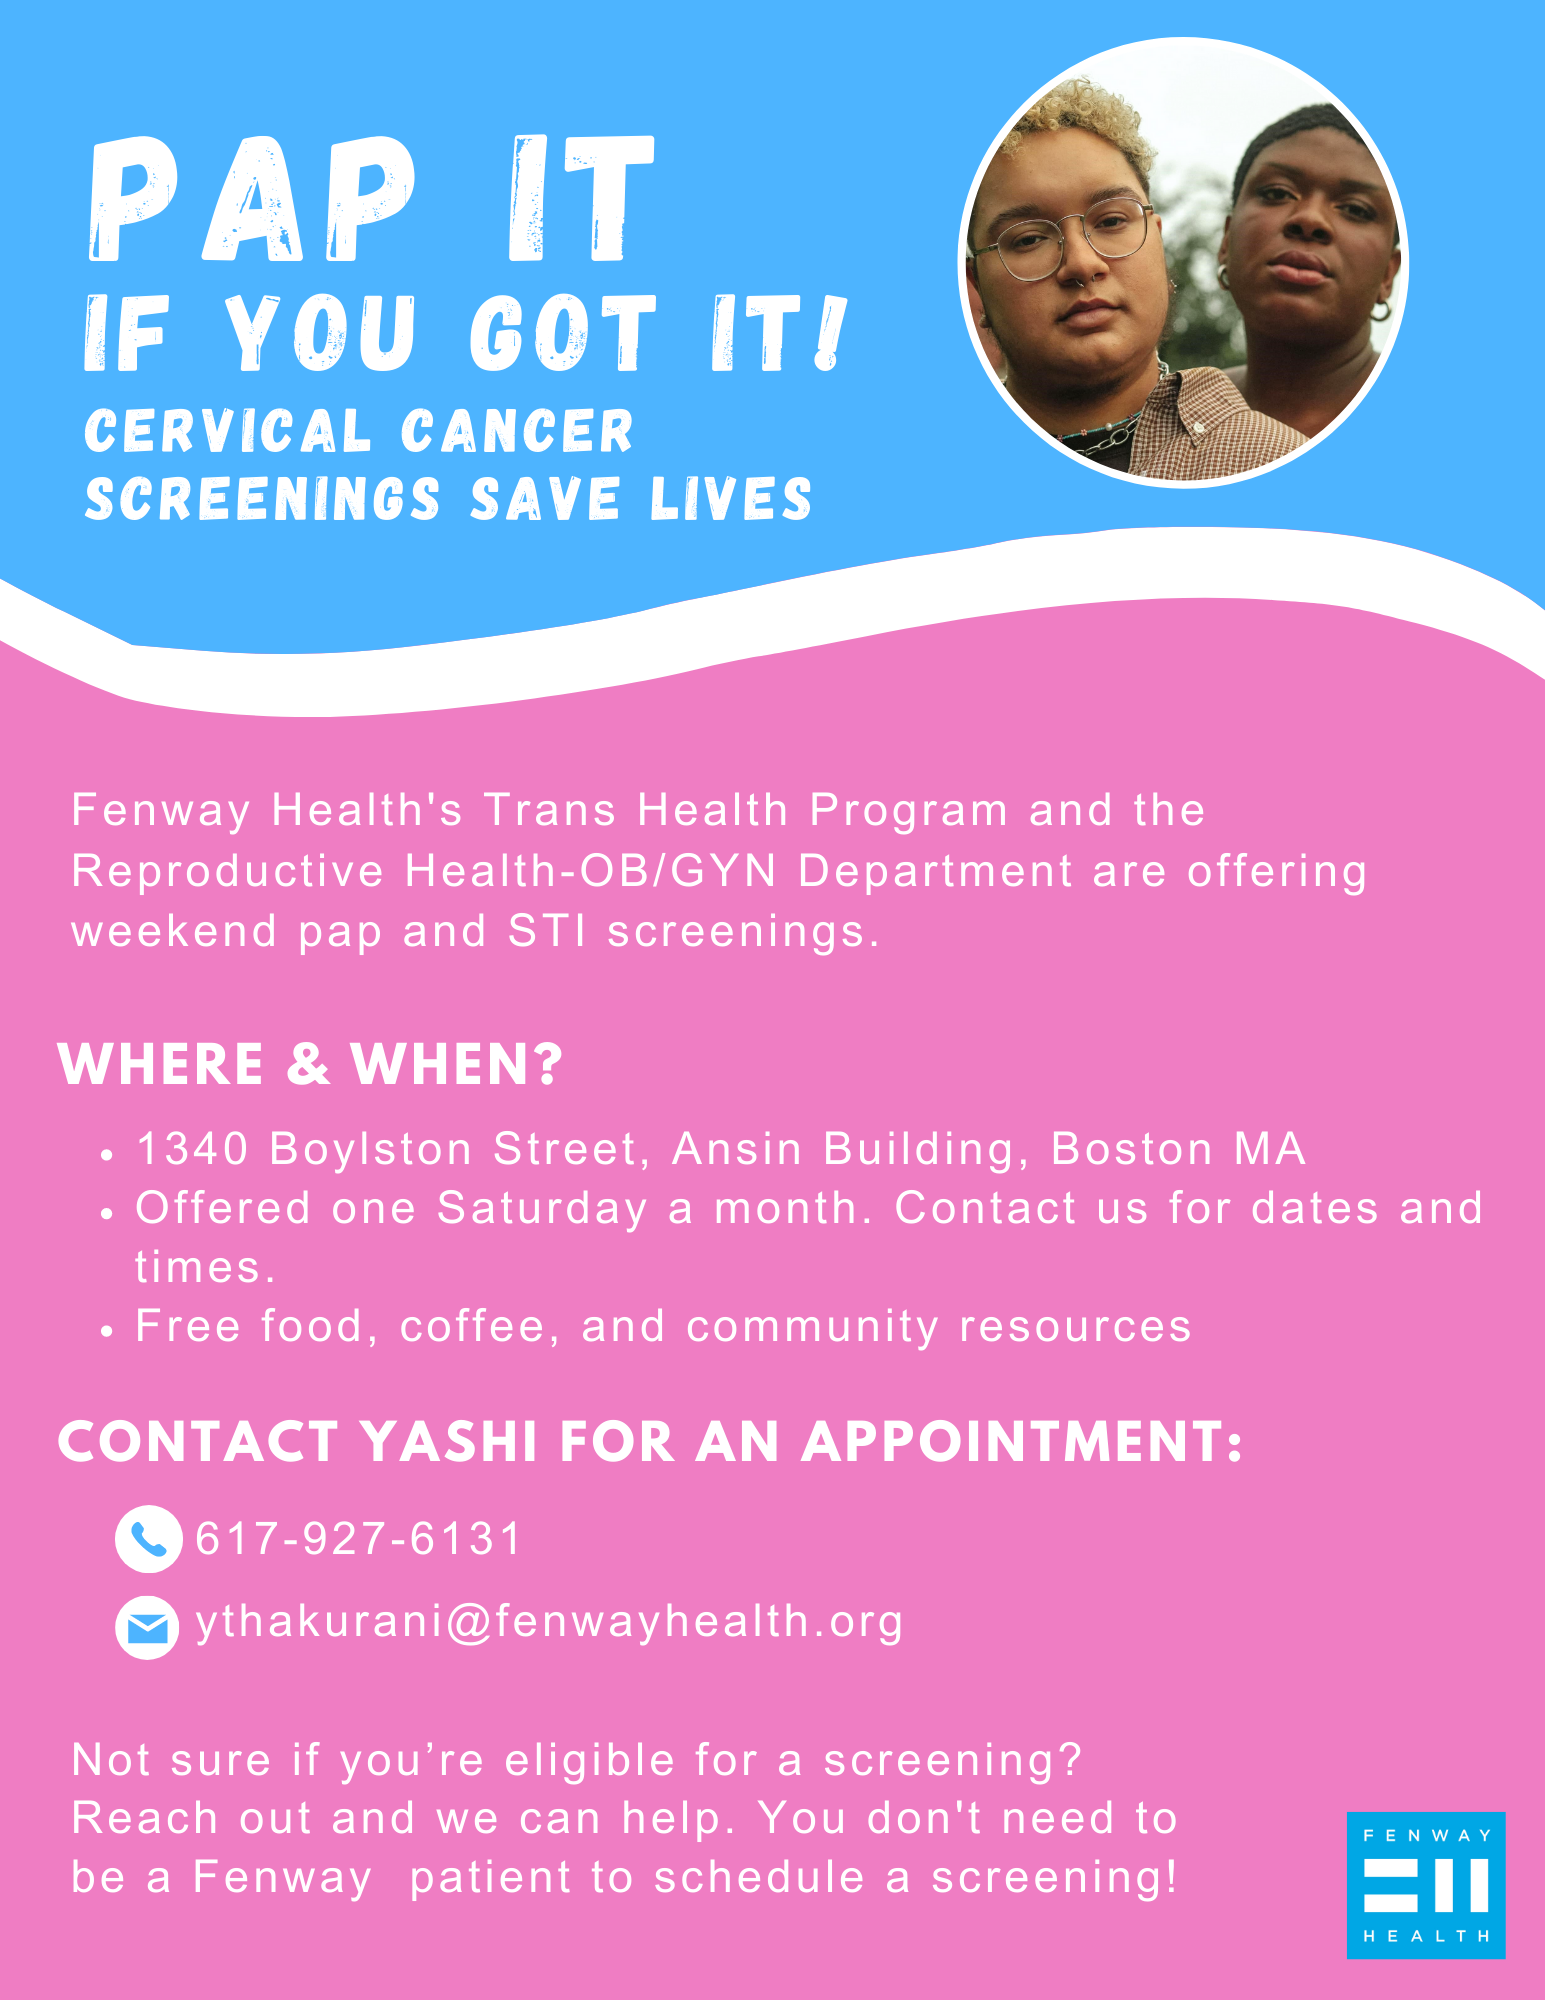 Pap it, if you got it! Cervical cancer screenings save lives Who we are? Fenway Health's Trans Health Program and the Reproductive Health Department are offering weekend pap and STI screenings. Getting your pap screening is important preventative health, and we know that for some trans and gender diverse people it can be uncomfortable and dysphoric. Join us in community; bring a supportive friend, partner, or family member if you’d like to; and check out some resources in an affirming environment. Not sure if you’re eligible for a screening? Reach out and we can help! Language for communication to providers/staff: As of November 2022, Fenway’s overall cervical cancer screening rate was reported to be 63% while among trans and non-binary patients it was 44%. This is compared to 72% of cisgender women and 56% of trans men reporting regular cervical cancer screenings at a primary care organization in Toronto (Kiran et al, 2019). The US rate of cervical cancer screening in 2019 was 73.5% (NIH). We are behind on both cis and trans cervical cancer screening rates. Together we can address the screening gap to improve our patients’ health and wellbeing! Please encourage your trans and gender diverse patients to reach out for a cervical cancer screening appointment (if applicable). Where & when? 1340 Boylston Street, Ansin Building, Boston MA Offered one Saturday a month beginning in July. Contact us for specific dates and times. Free food, coffee, and community resources Contact Yashi for an appointment: Phone: 617-927-6131 Email: ythakurani@fenwayhealth.org You don't need to be a Fenway patient to schedule a screening!